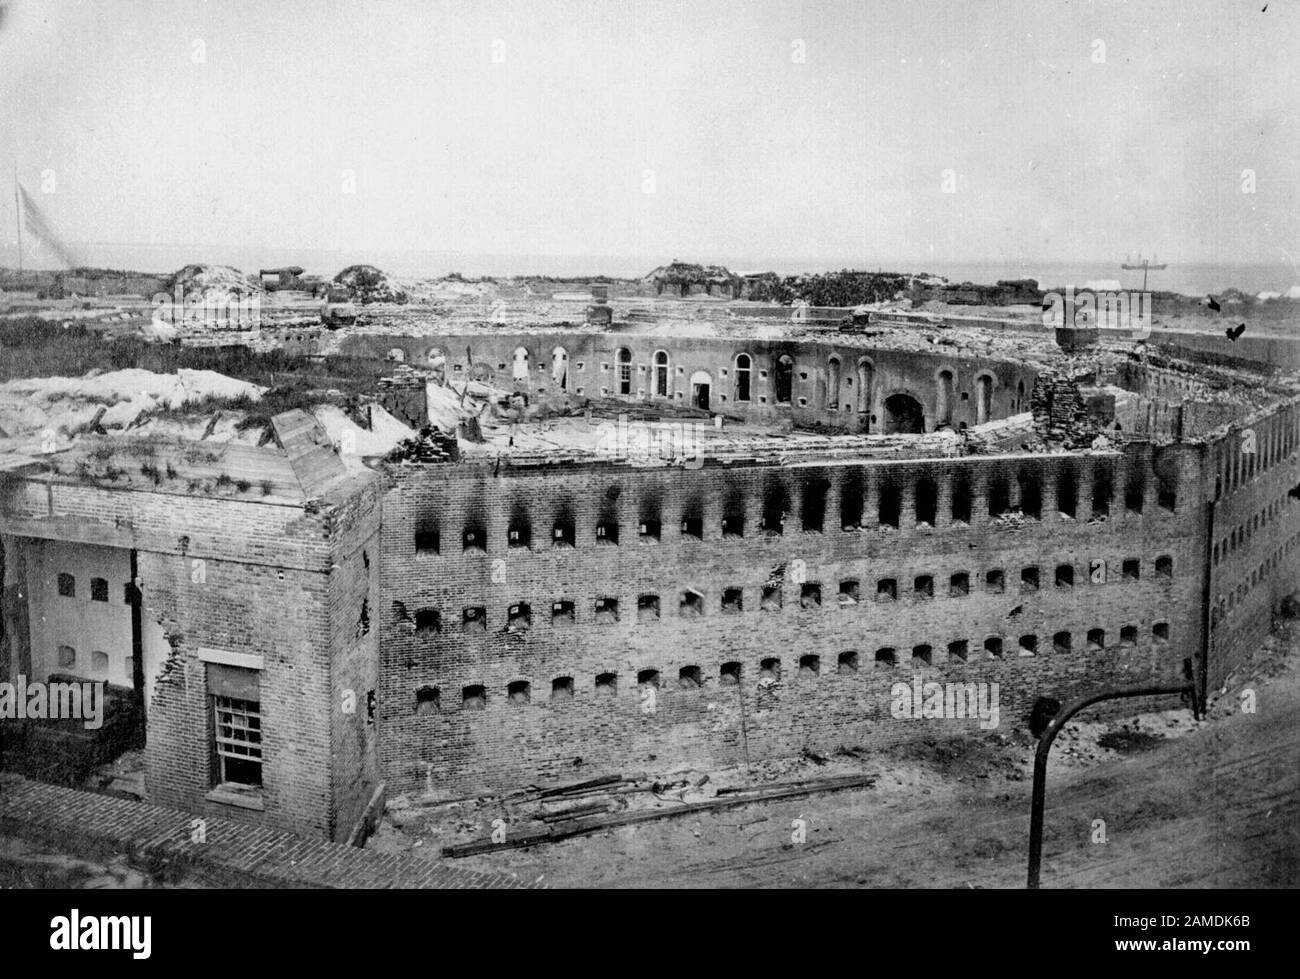 The citadel at Fort Morgan as it appeared after its surrender following the Battle of Mobile Bay. Stock Photo